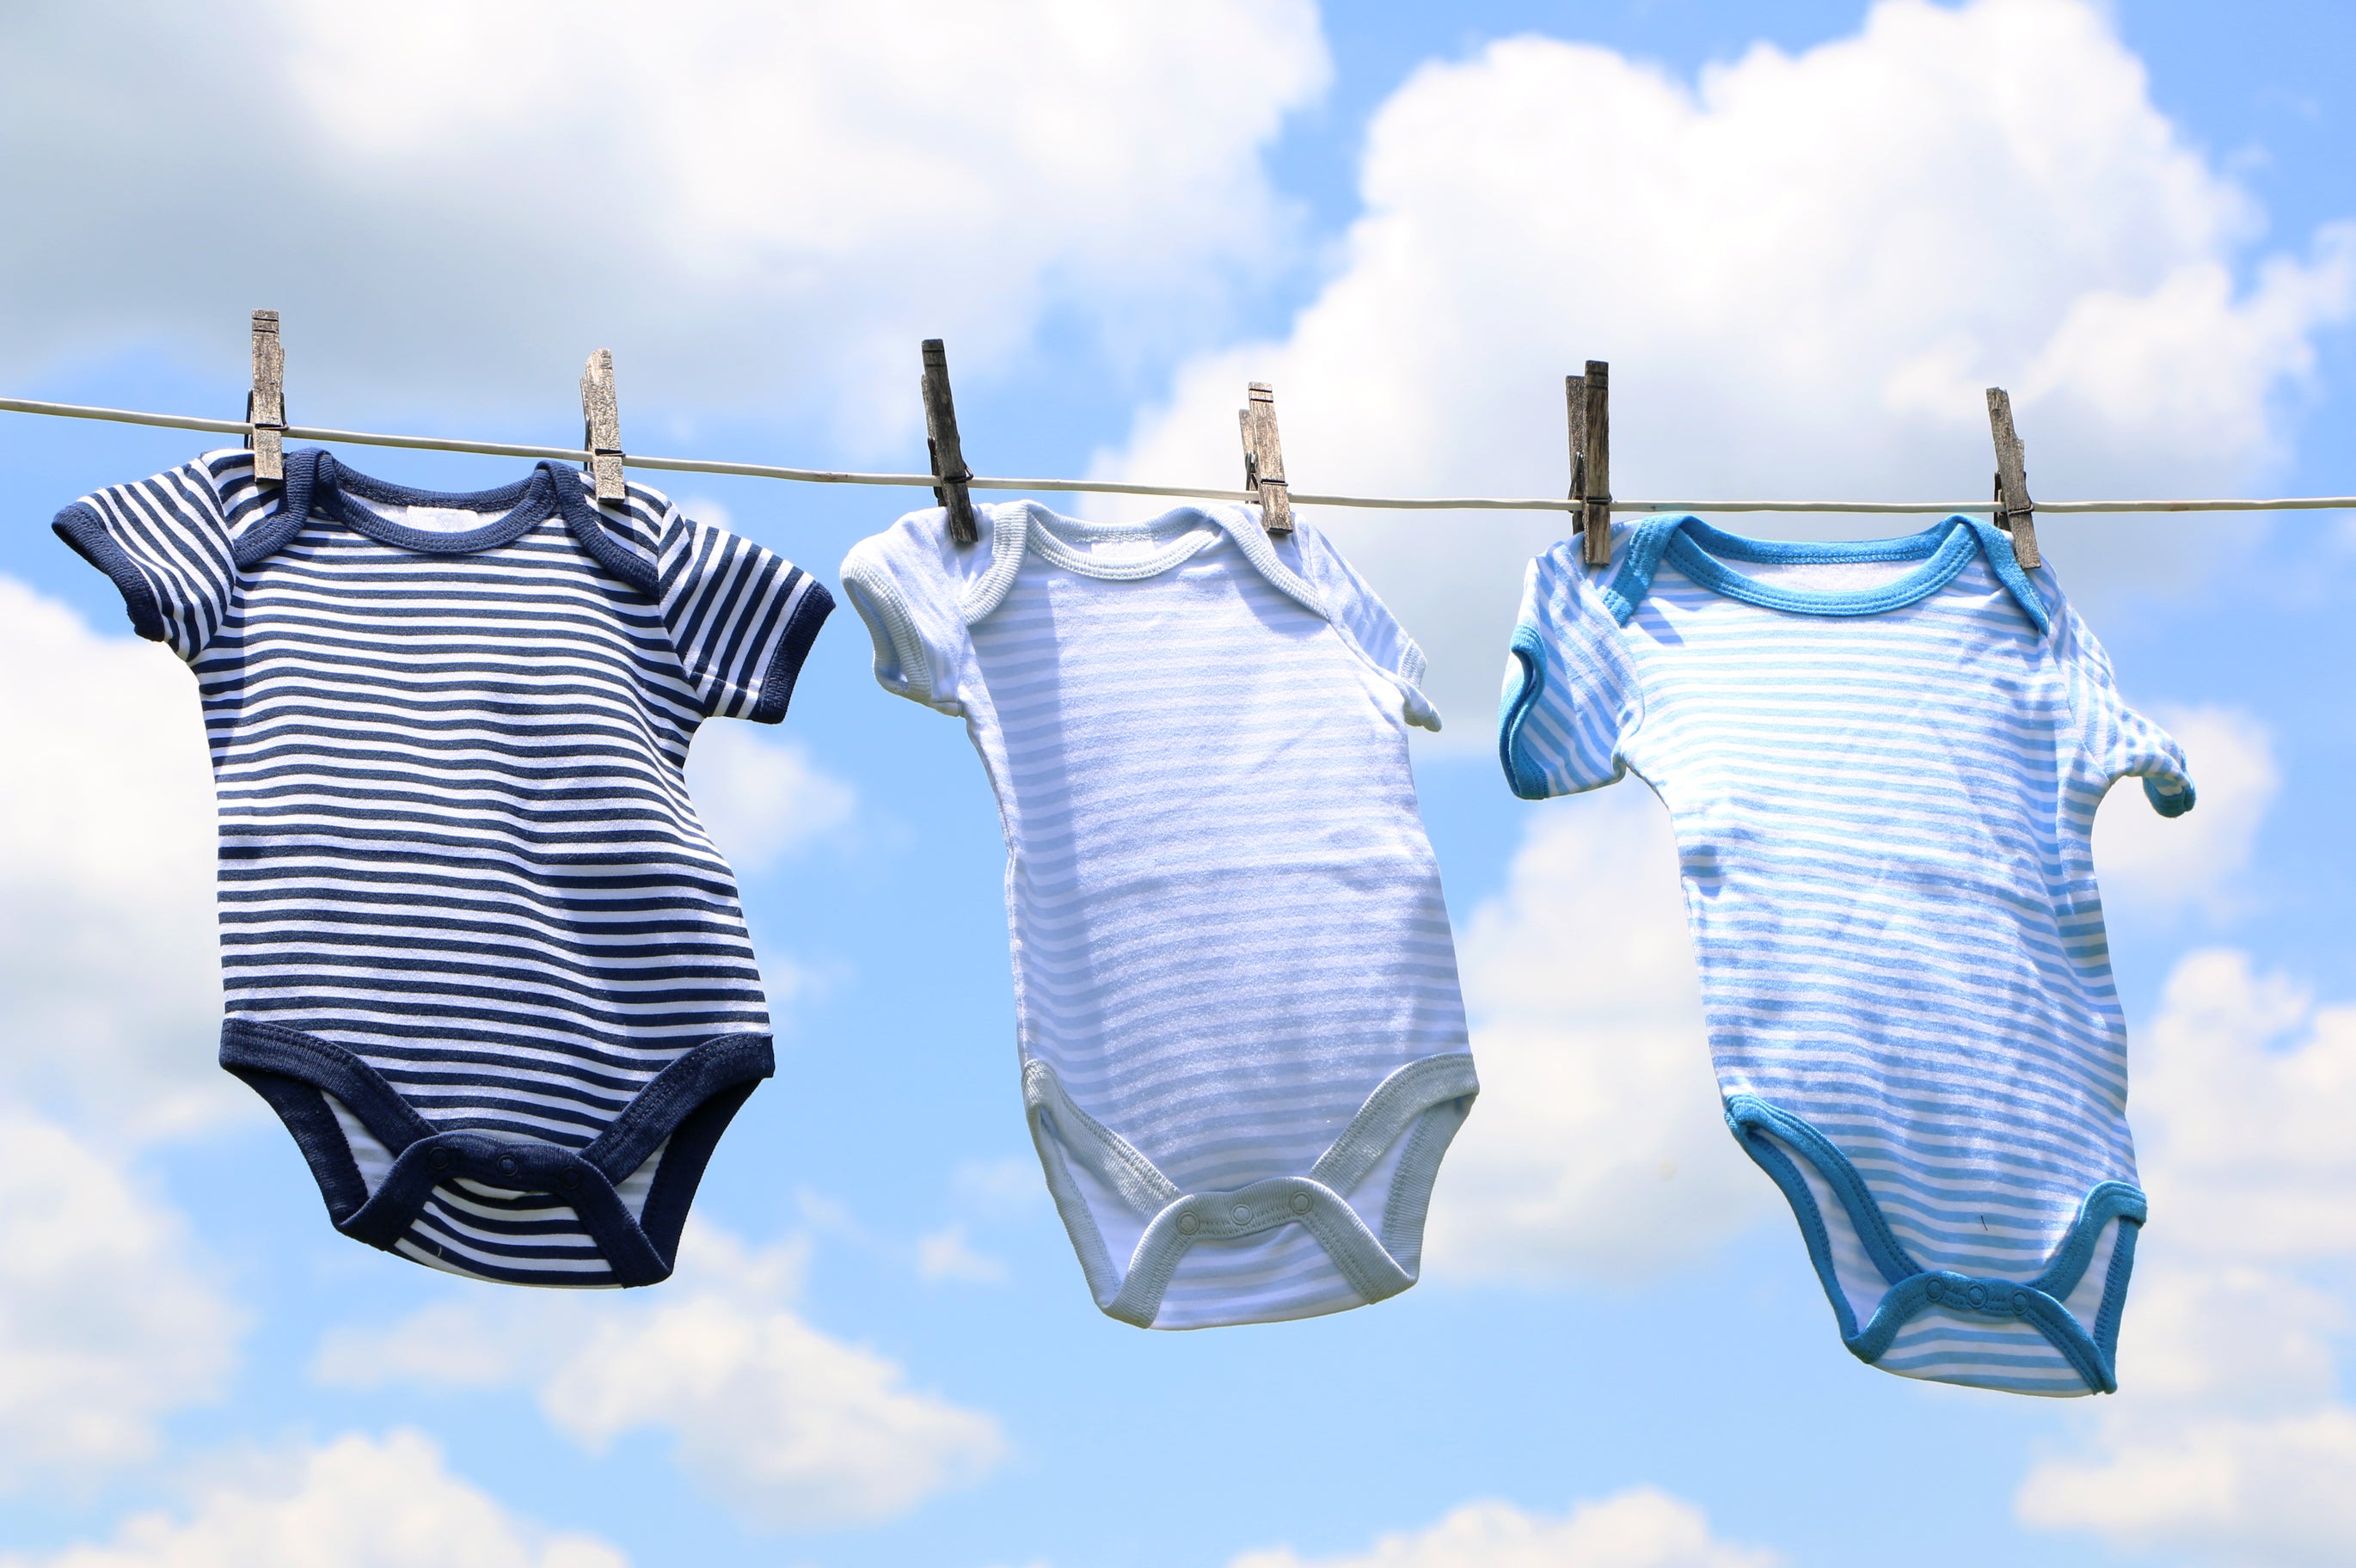 Baby onesies or rompers hanging on a clothing line against a blue sky. If your baby has outgrown their cute clothes, you can turn them into cleaning rags!